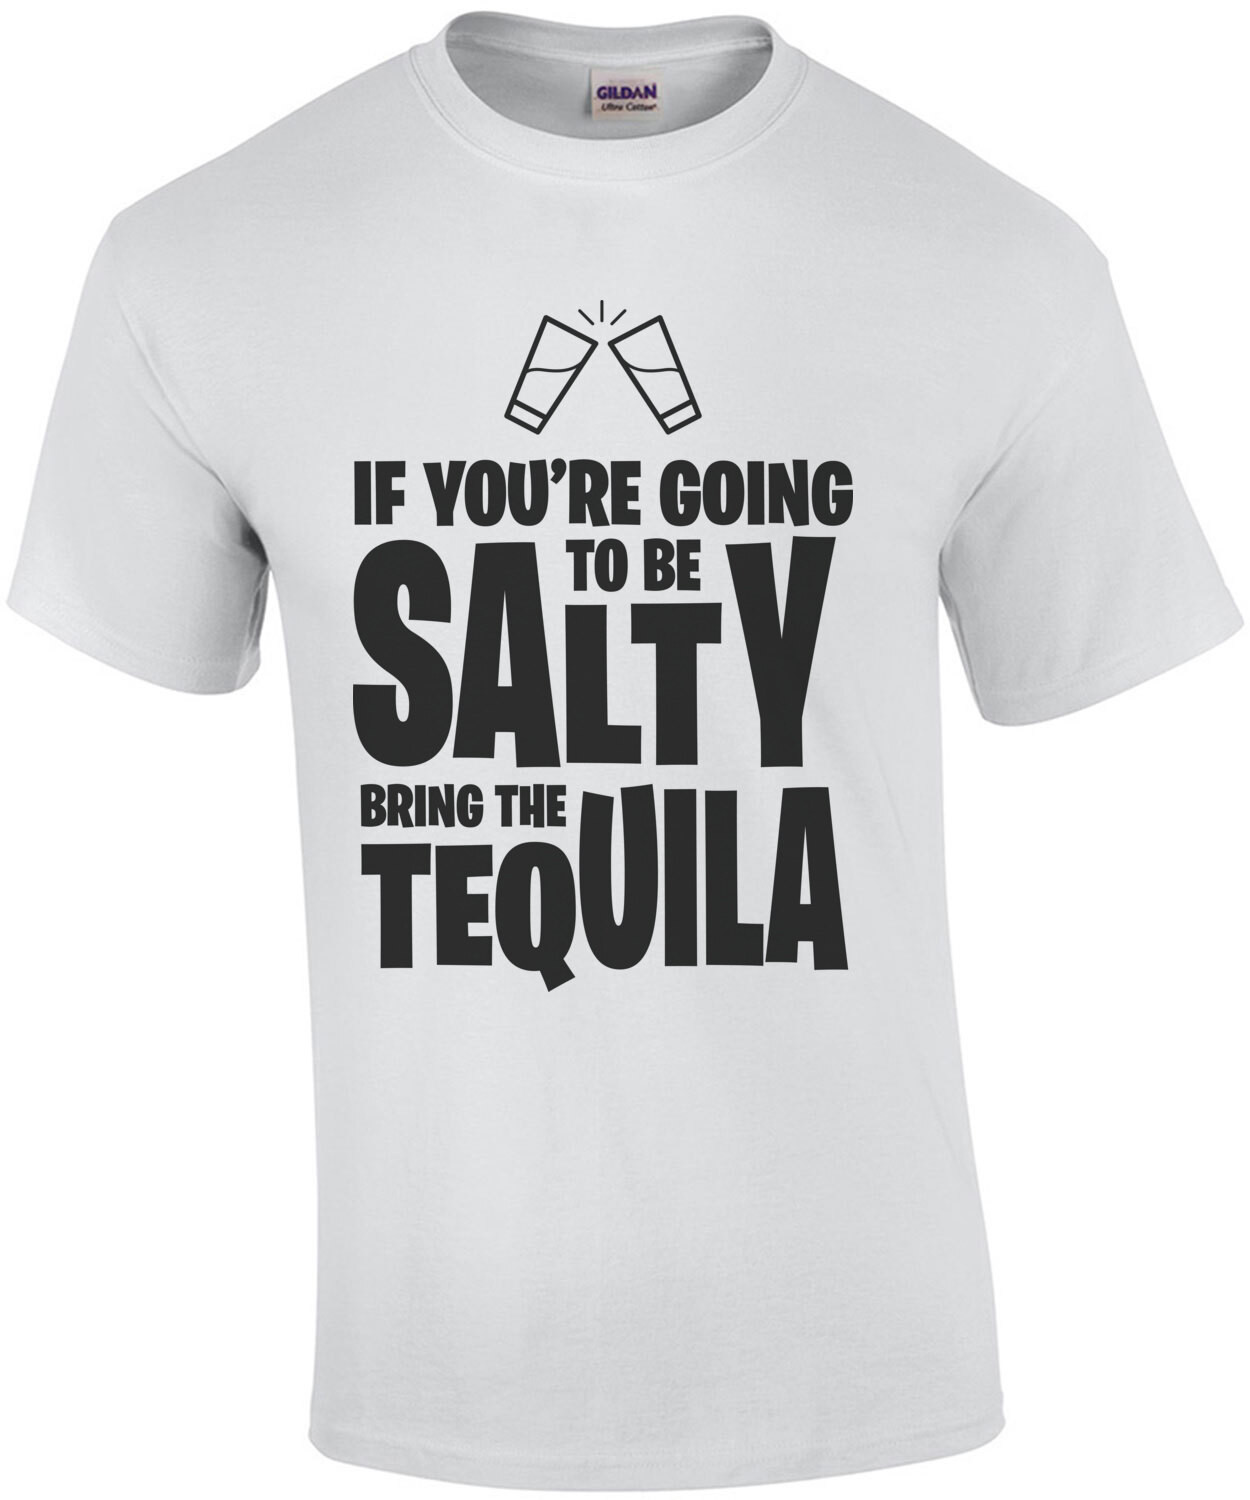 If you're going to be salty bring the tequila - drinking t-shirt